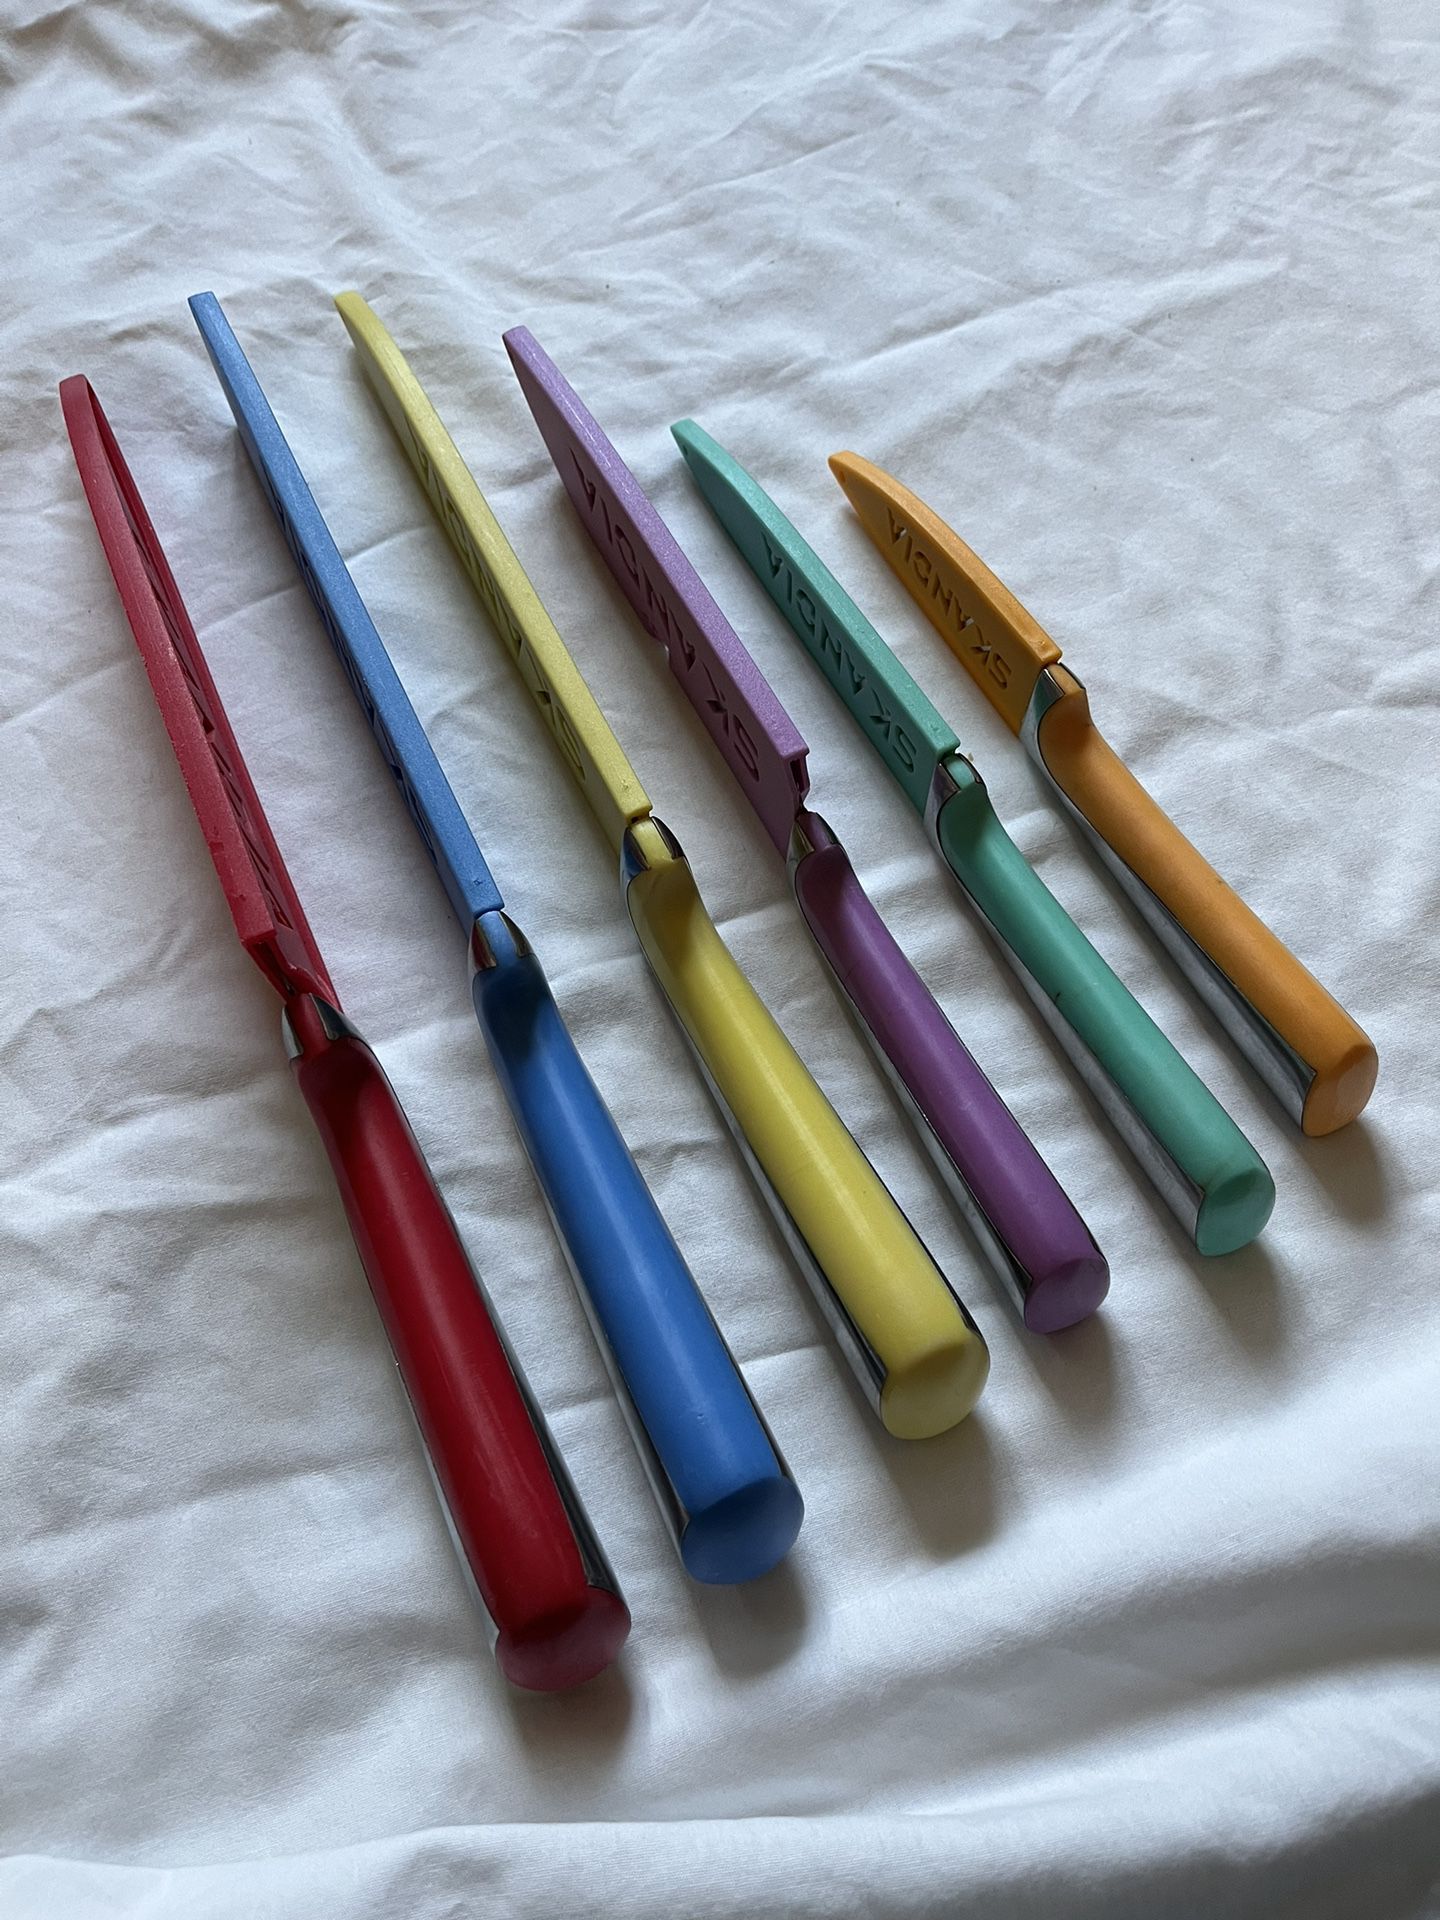 Cuisinart Advantage Knife Set for Sale in Dundee, FL - OfferUp